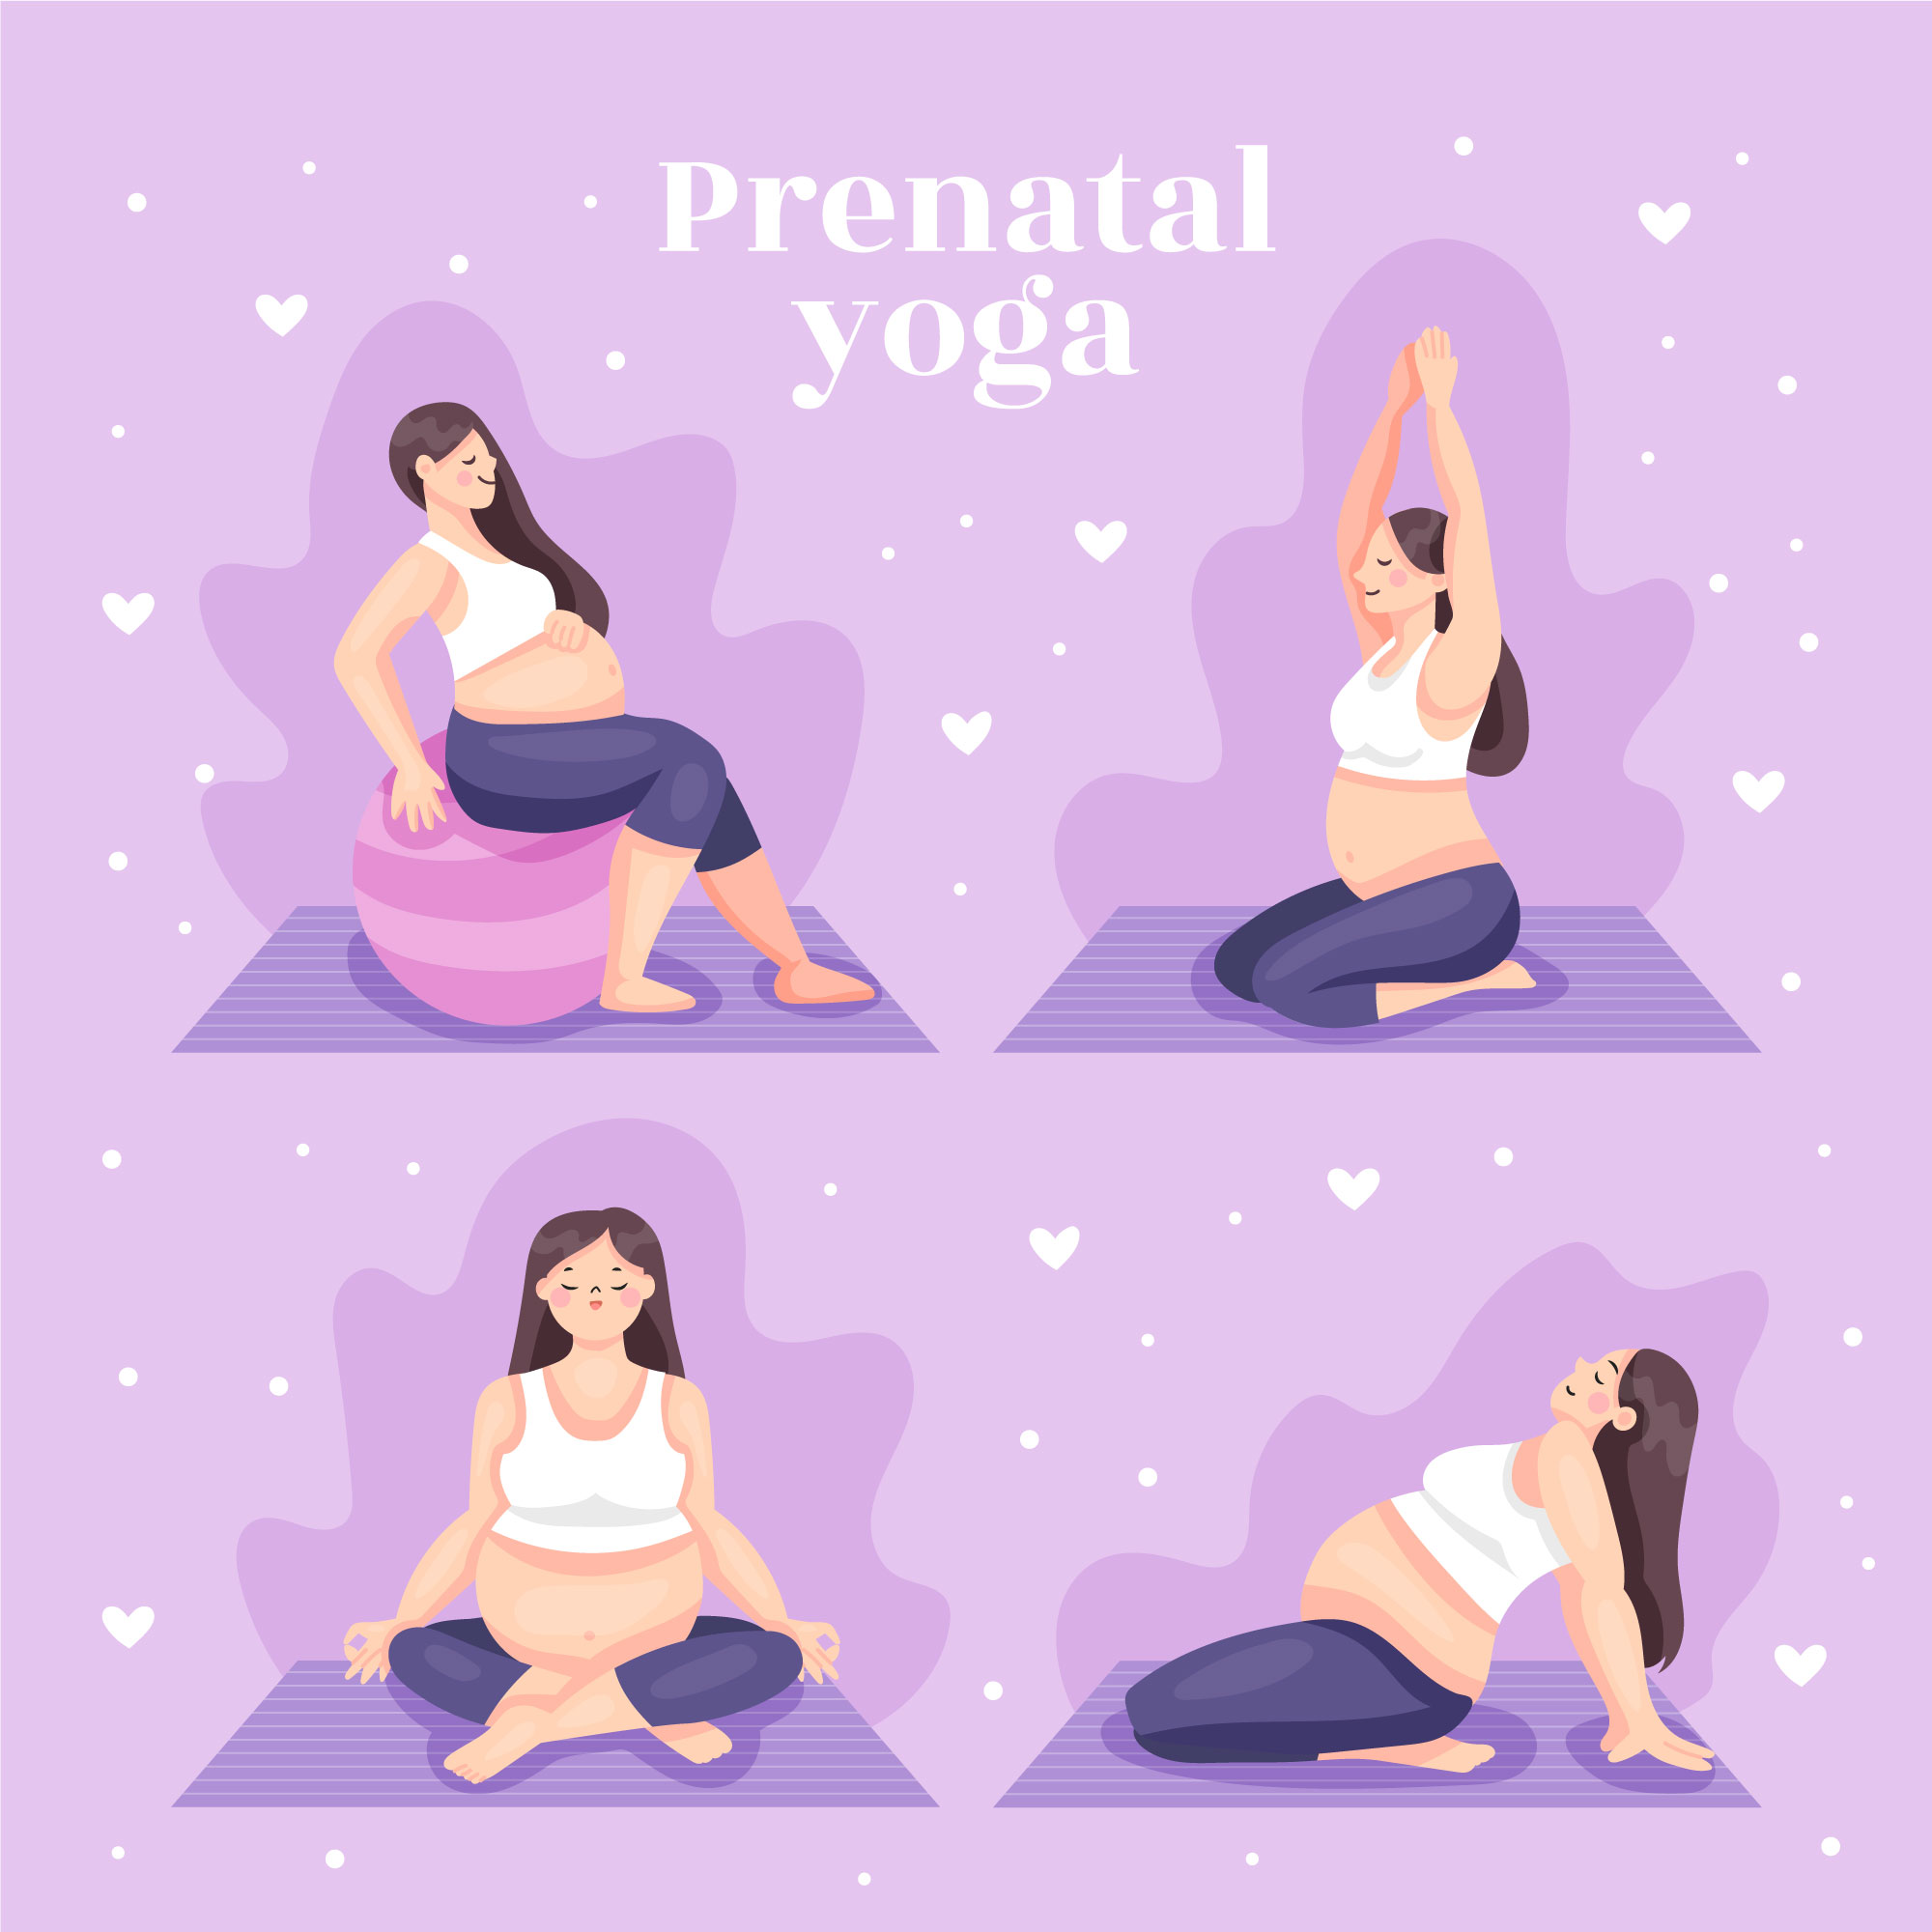 15-Minute Yoga for Fertility | Yoga Poses for the Two Week Wait (TWW) -  YouTube